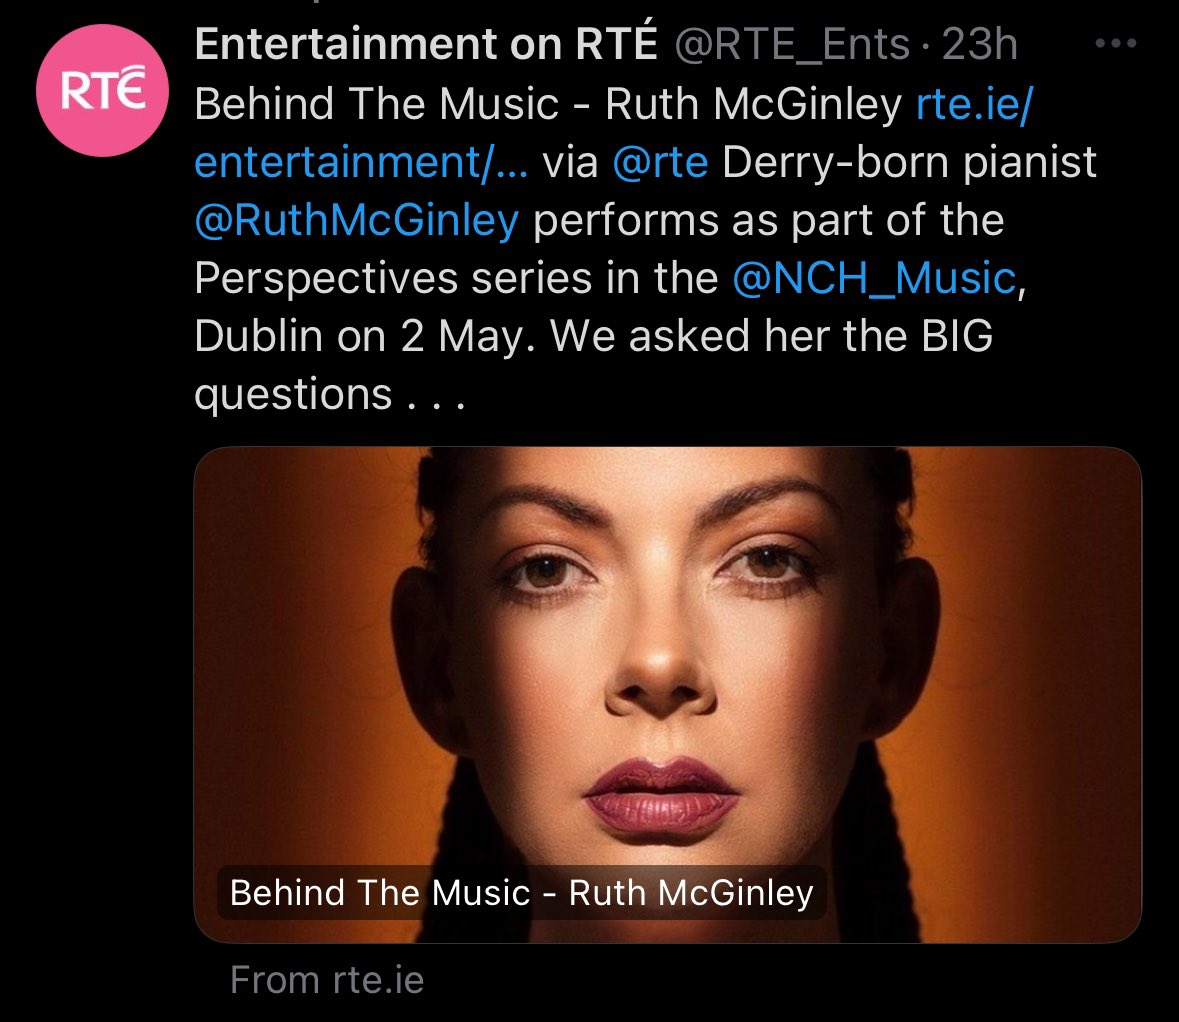 Thank you @RTE_Ents for featuring my ‘Behind The Music’ and asking me the BIG questions.. 😅😀 Read here for a nosey: rte.ie/entertainment/… Tickets available: nch.ie/all-events-lis… @NCH_Music